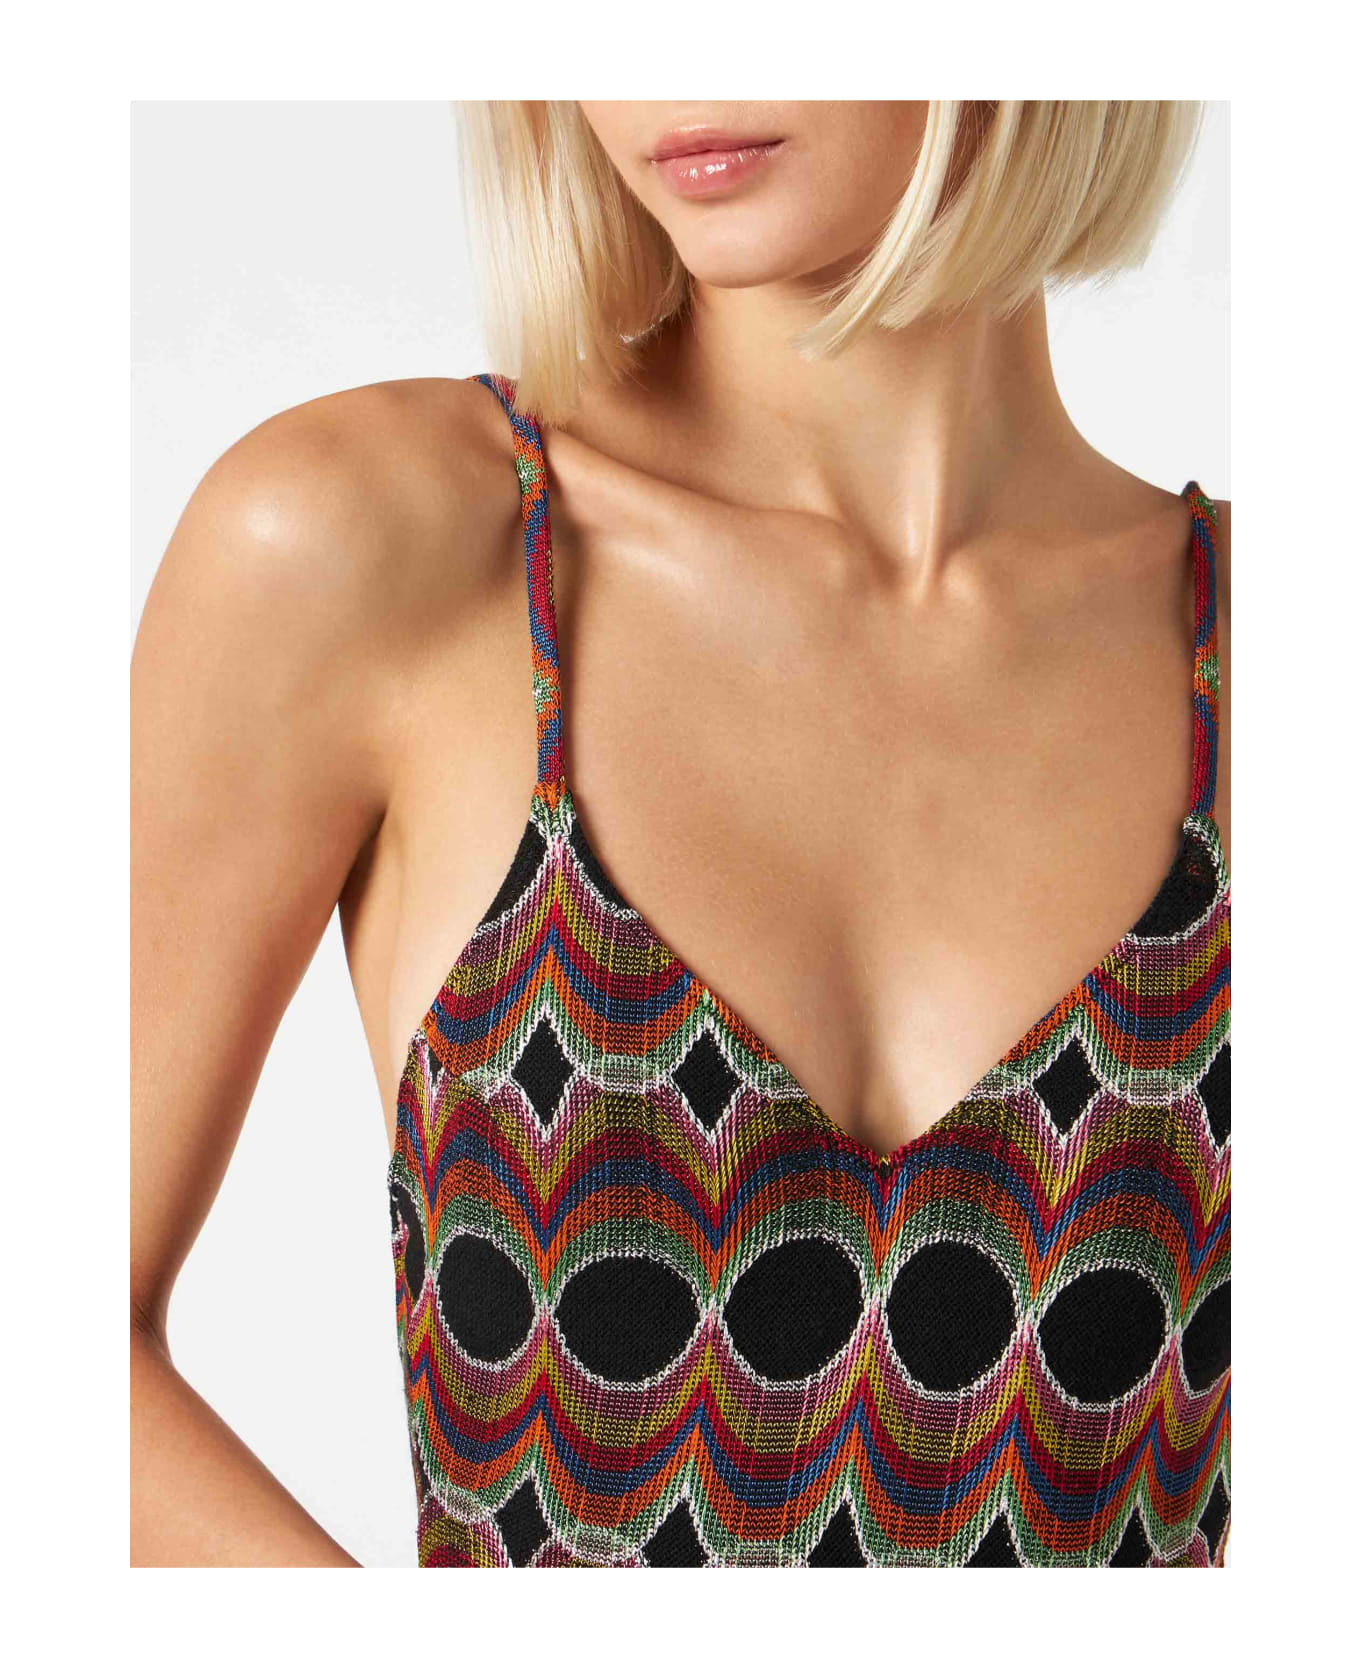 MC2 Saint Barth Woman One Piece Swimsuit With Pattern - BROWN